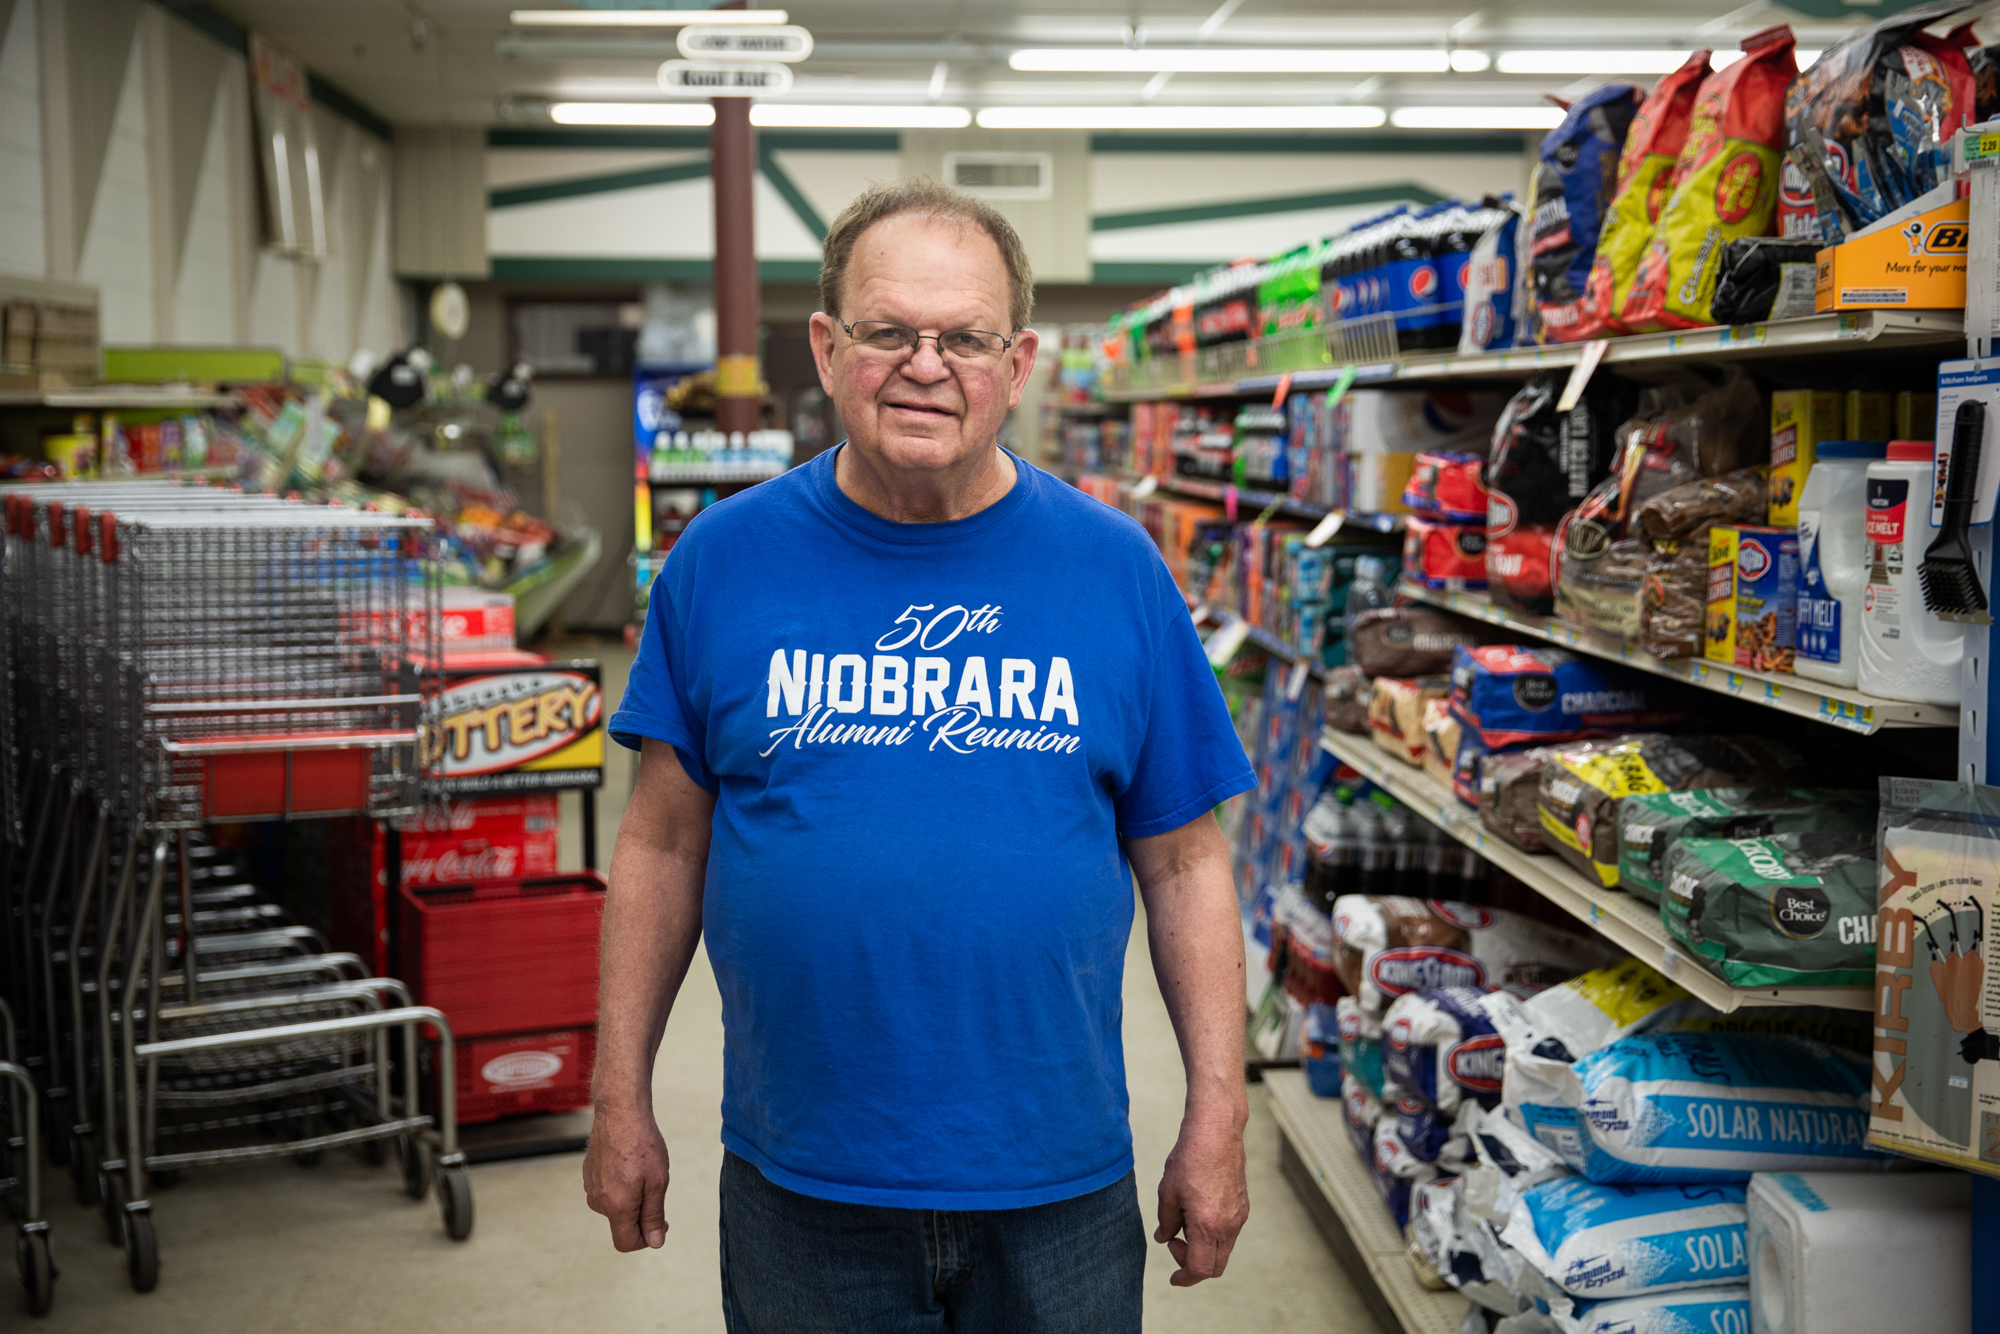 Ken Farnik - Ken Farnik says Farnik's Market in Niobrara, Nebraska, is struggling to stay in business since the flooding in March, due to fewer customers. Niobrara relies on  hunters and visitors to nearby Niobrara State Park to support its economy. (Anya Magnuson/News21)